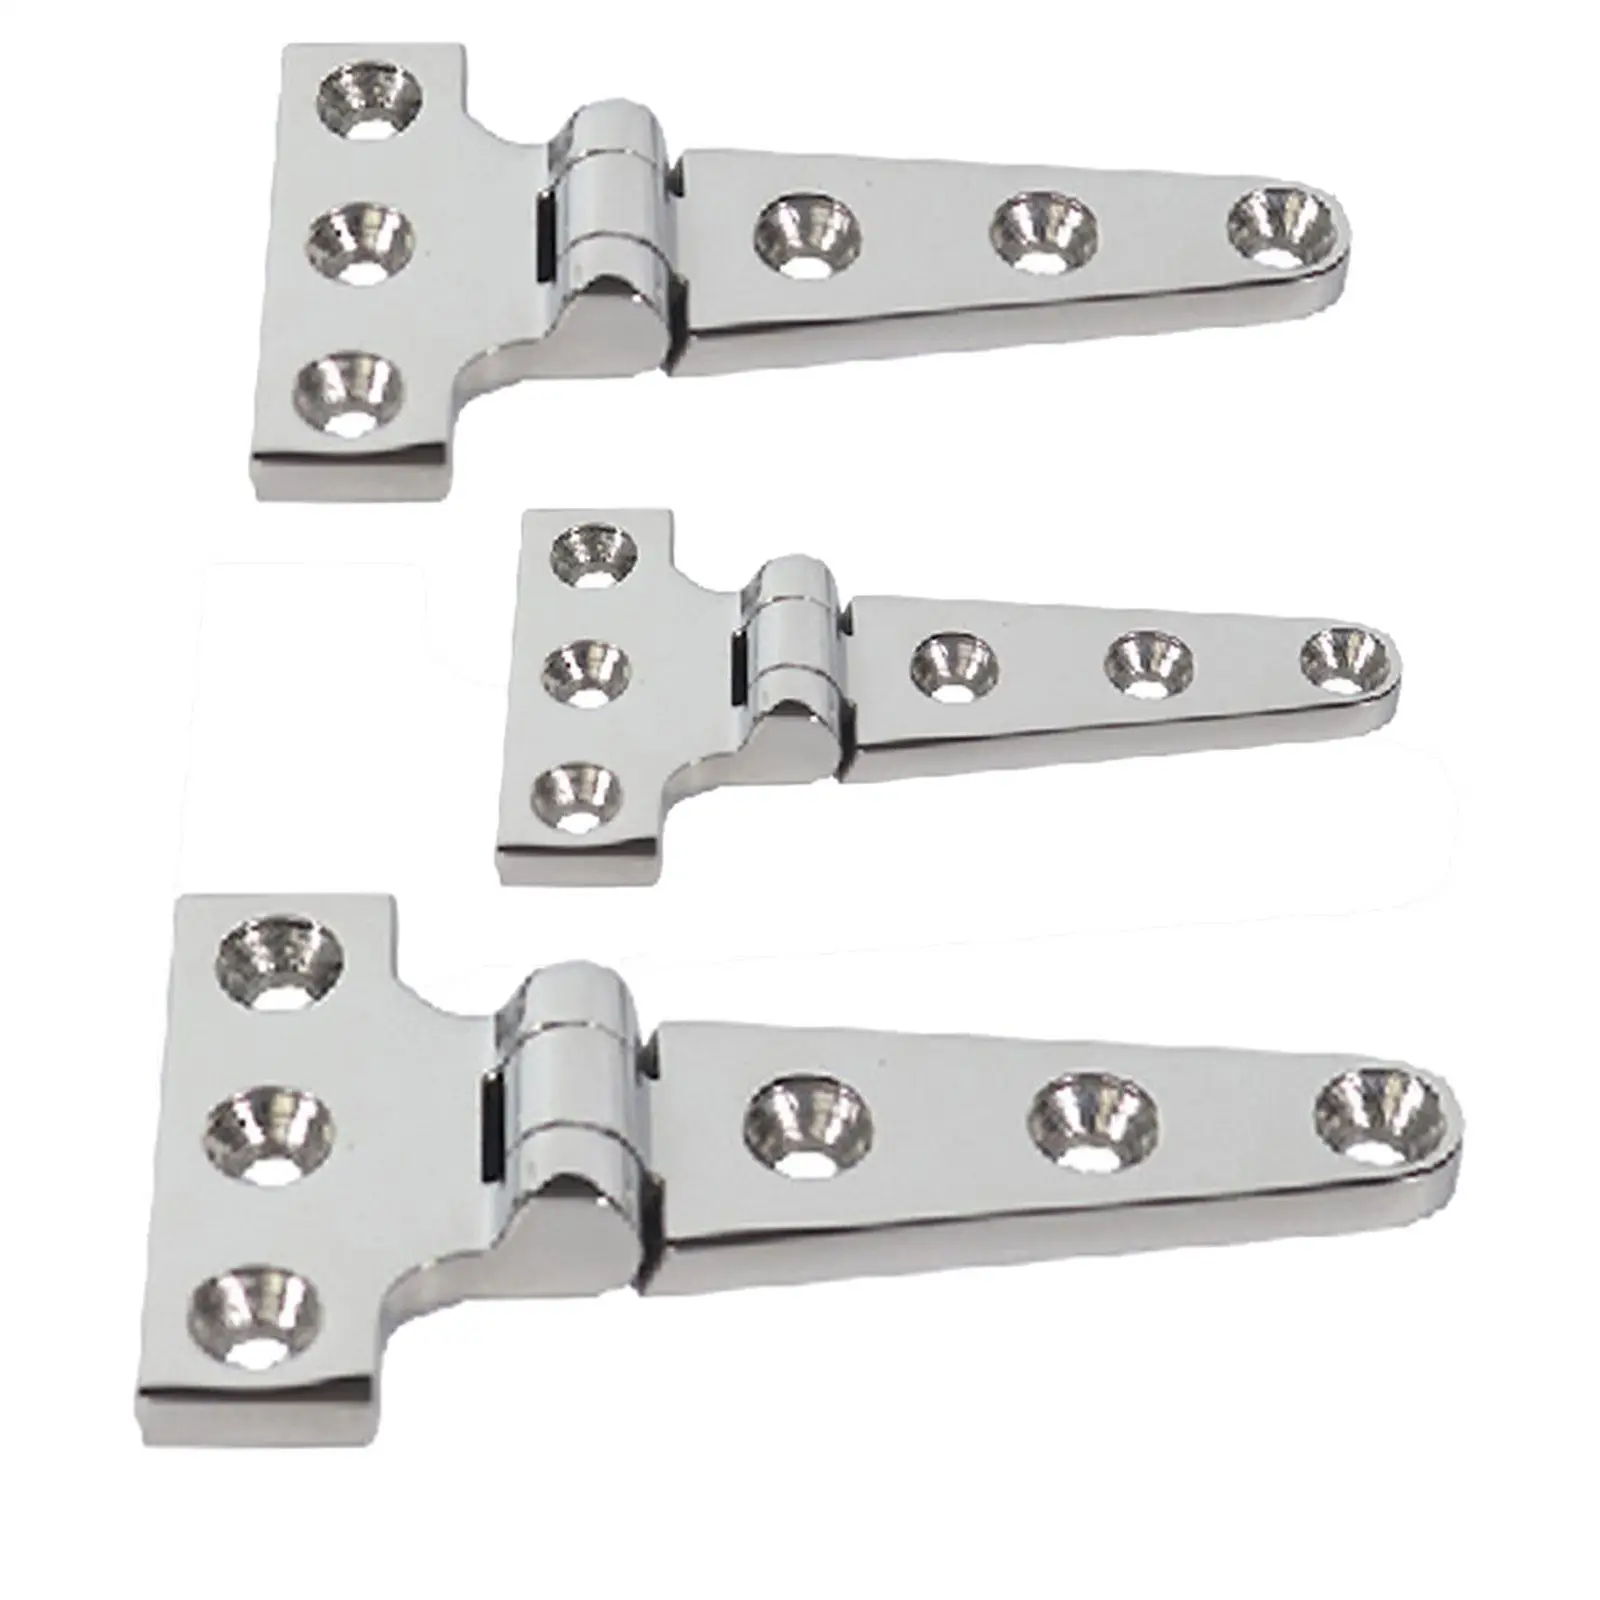 Marine Grade T-Hinges, Heavy Duty 316 Stainless Steel Boat Hinge, Convenient Installation (Screws Not Included),